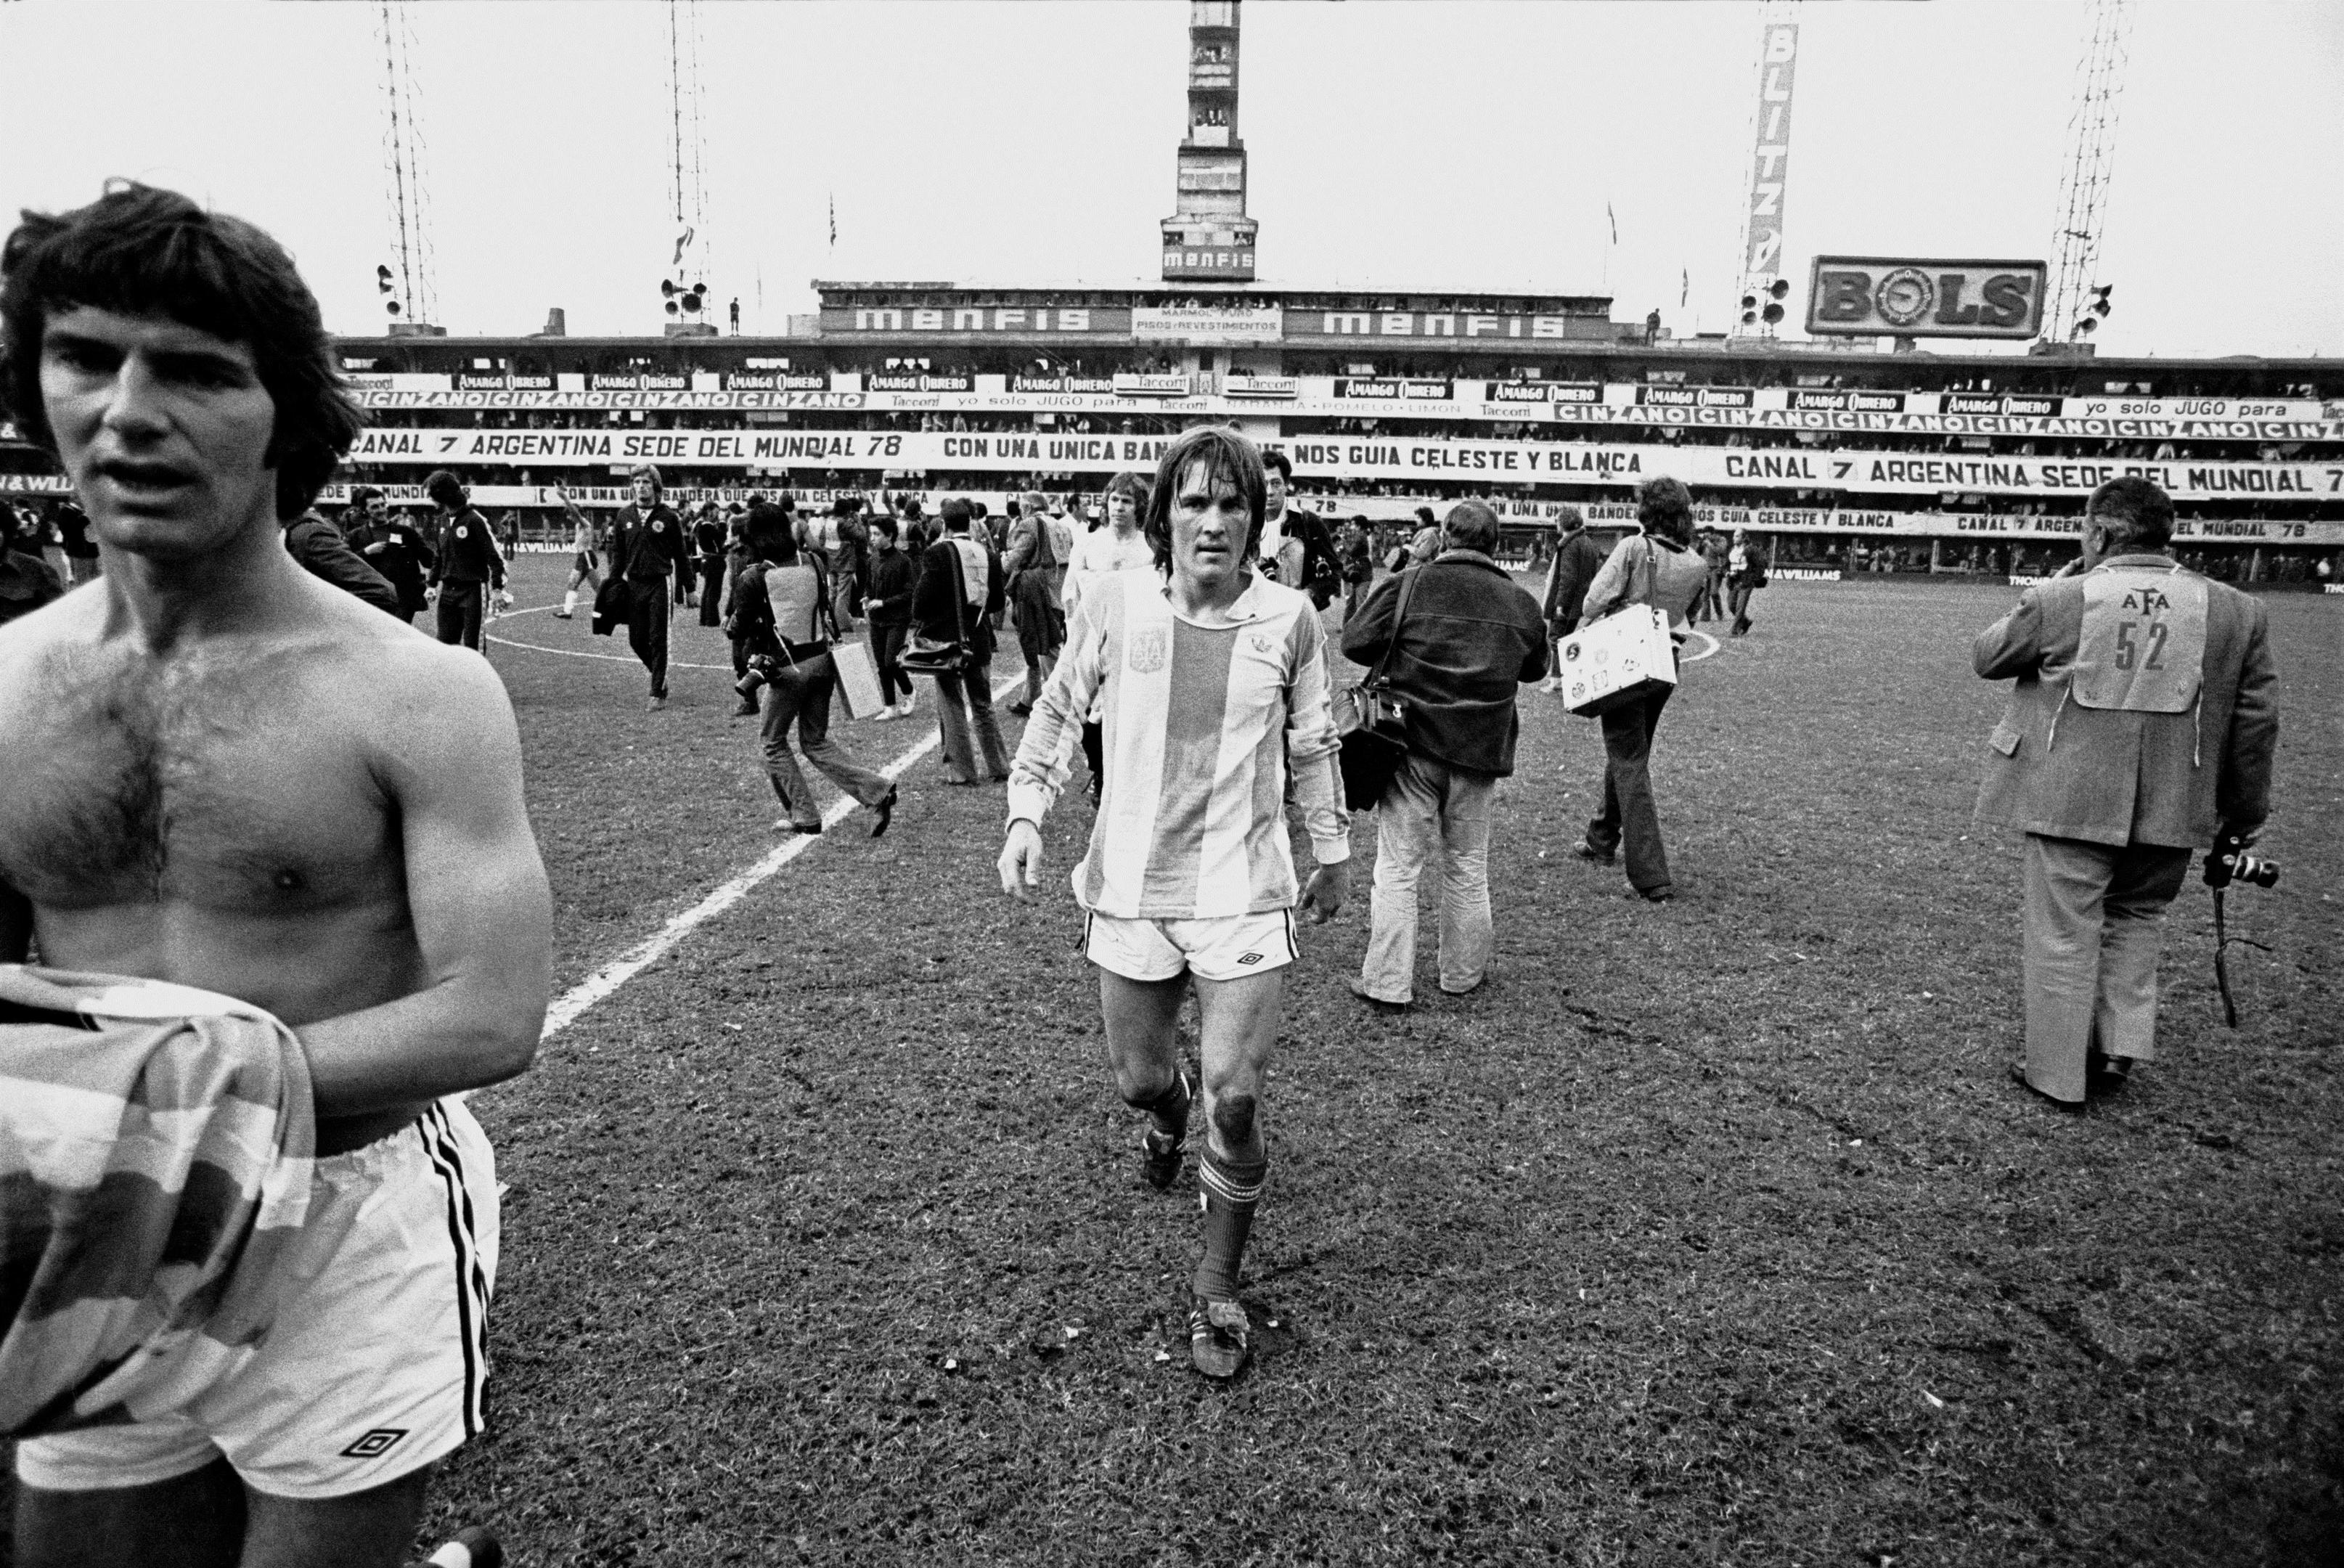 Kenny Dalglish, complete with Argentina top, comes off the pitch after a torrid friendly in Buenos Aires in 1977. Team-mate Martin Buchan of Manchester United is on the left (EMPICS Sport)